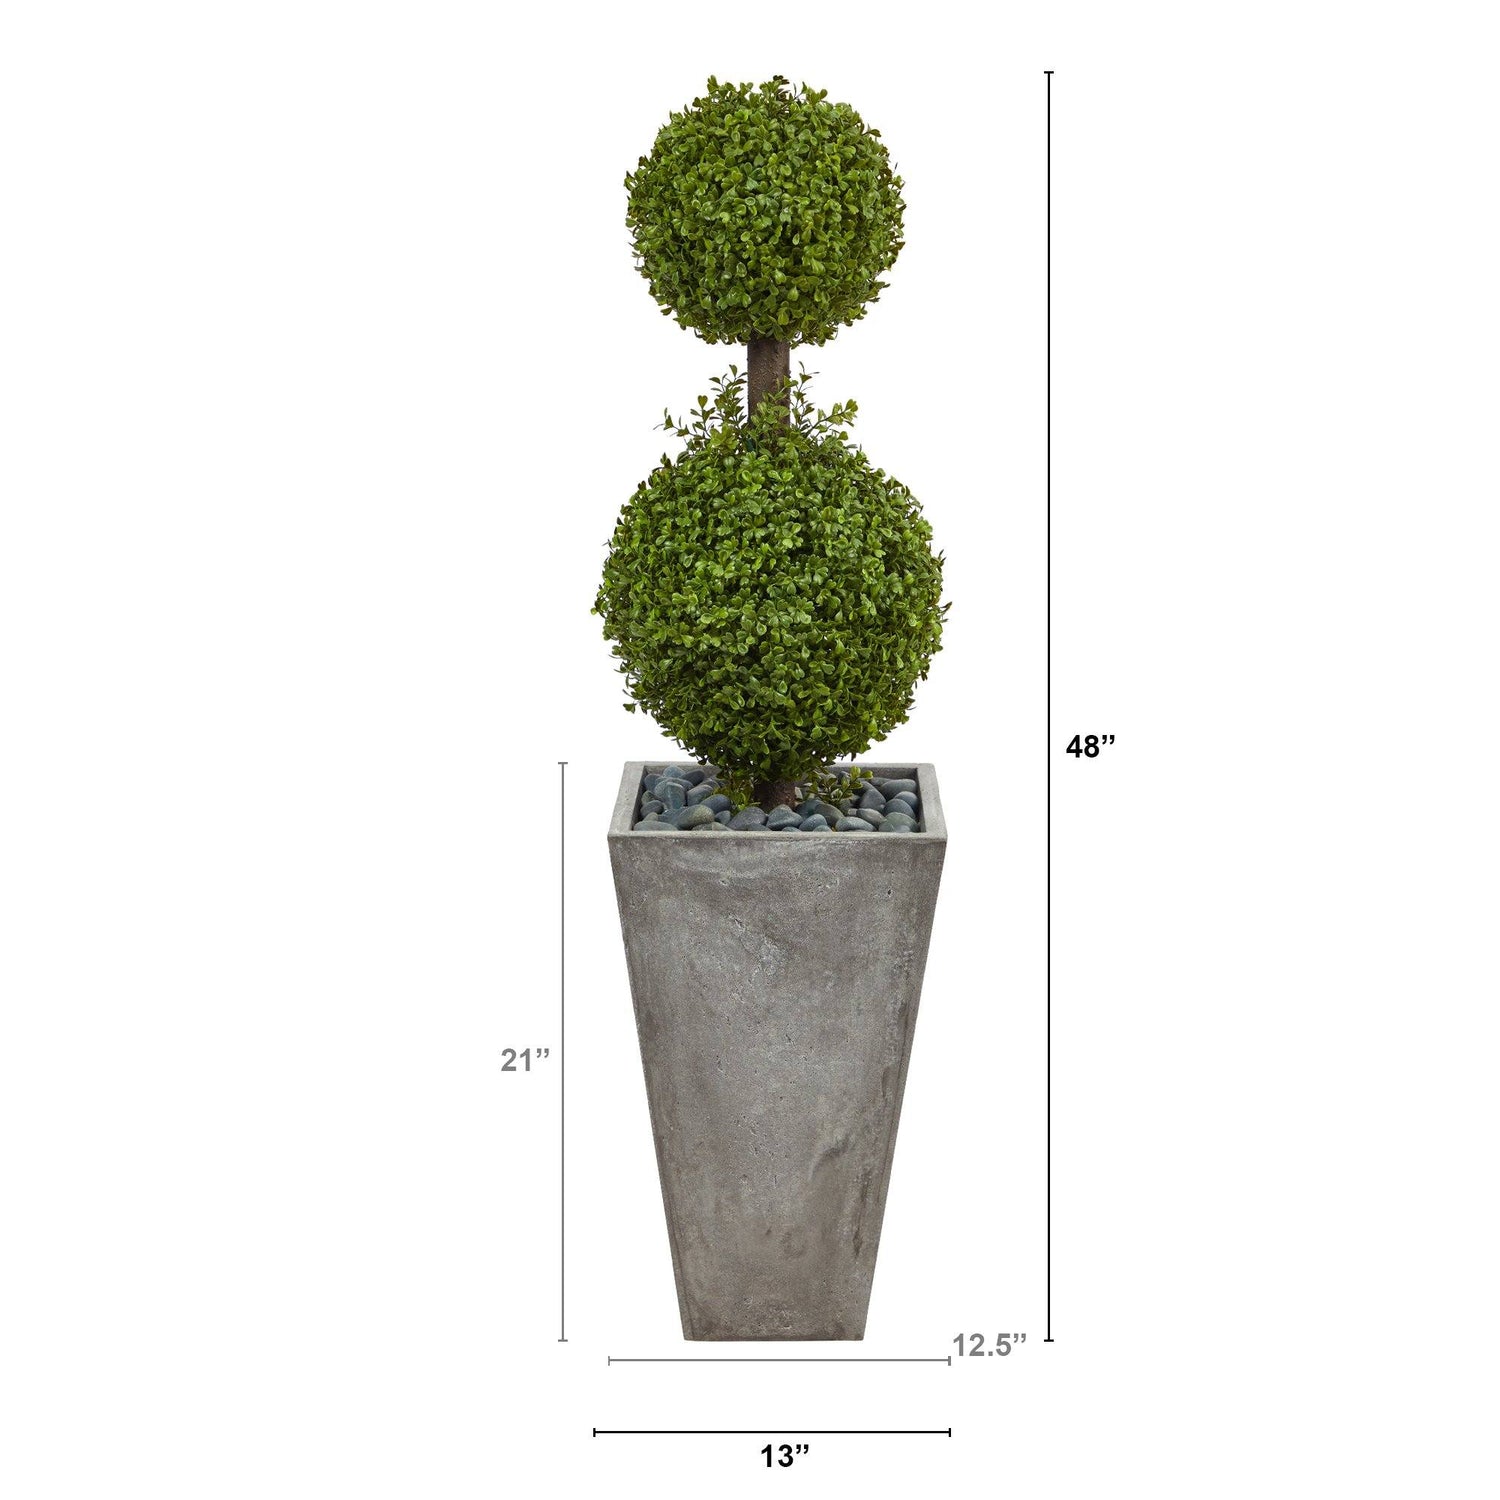 4’ Double Boxwood Topiary Artificial Tree in Cement Planter (Indoor/Outdoor)